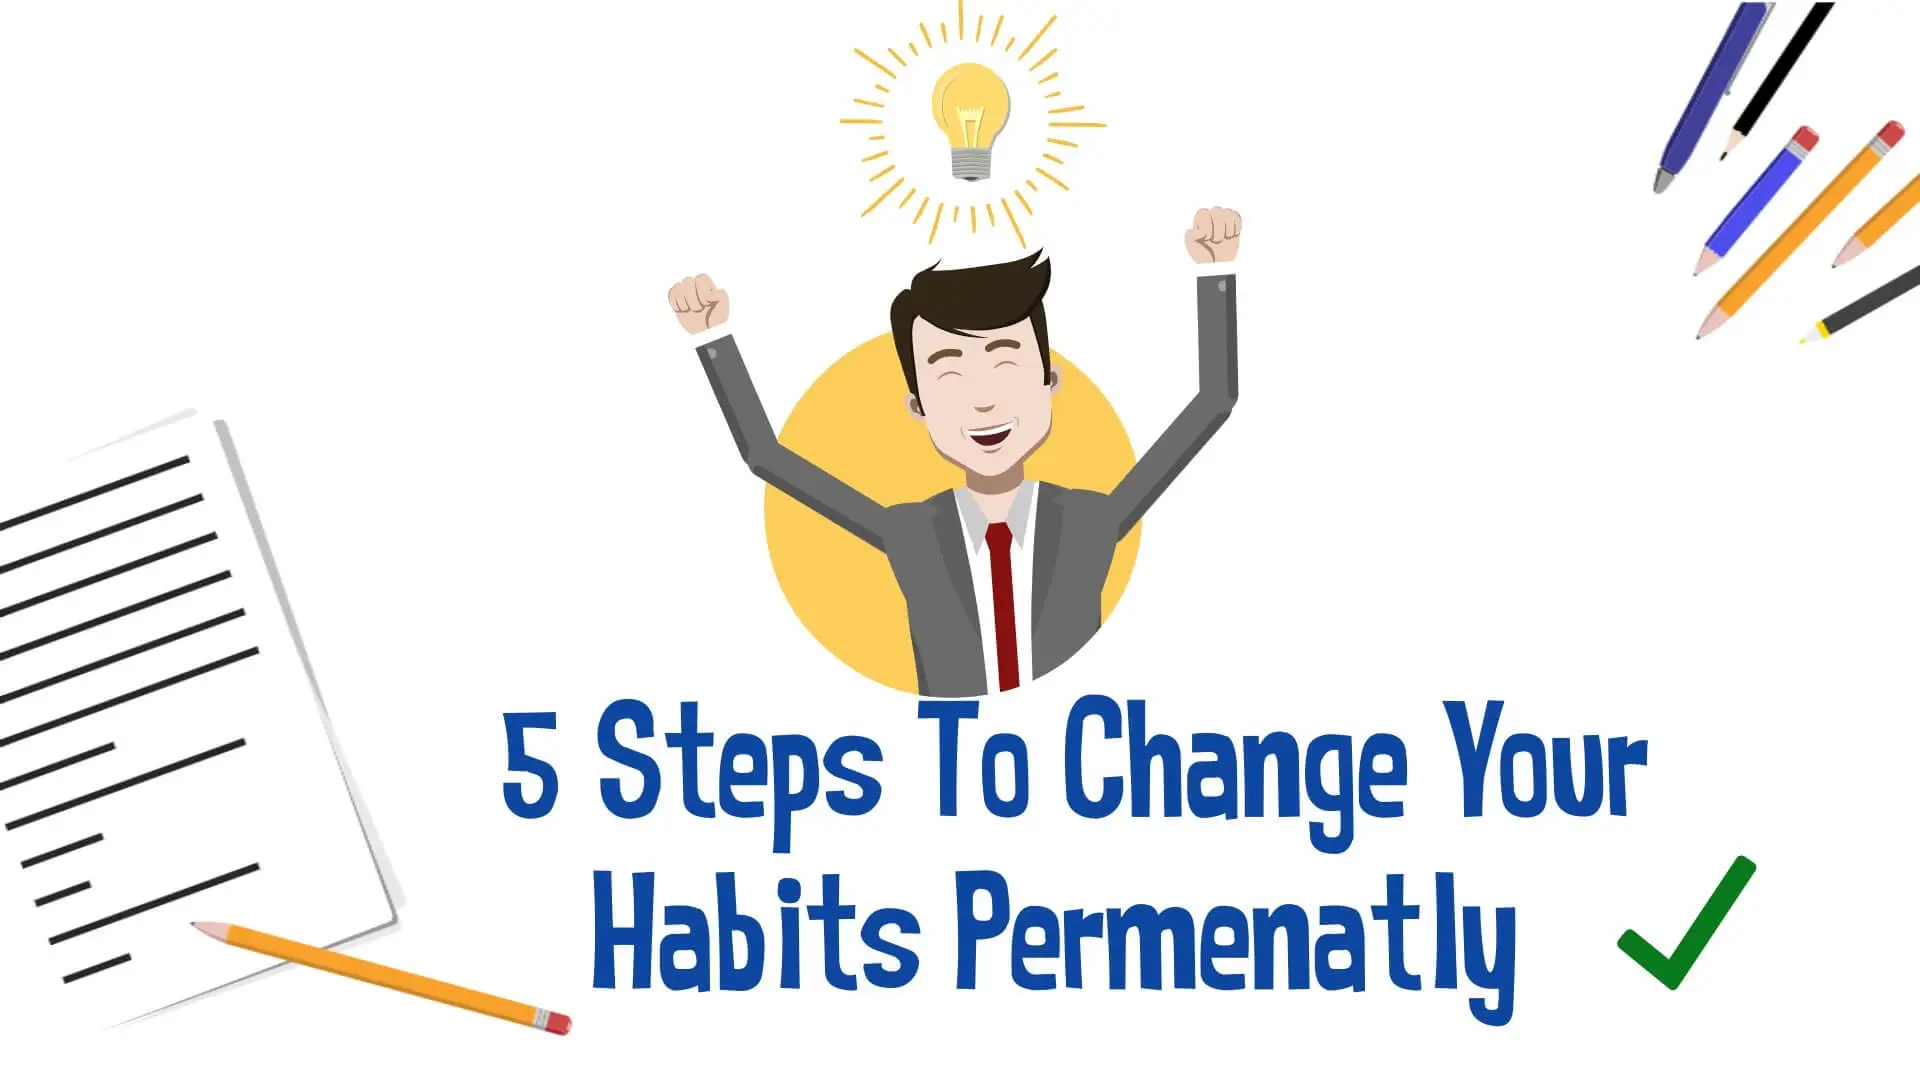 steps to change habits permanently